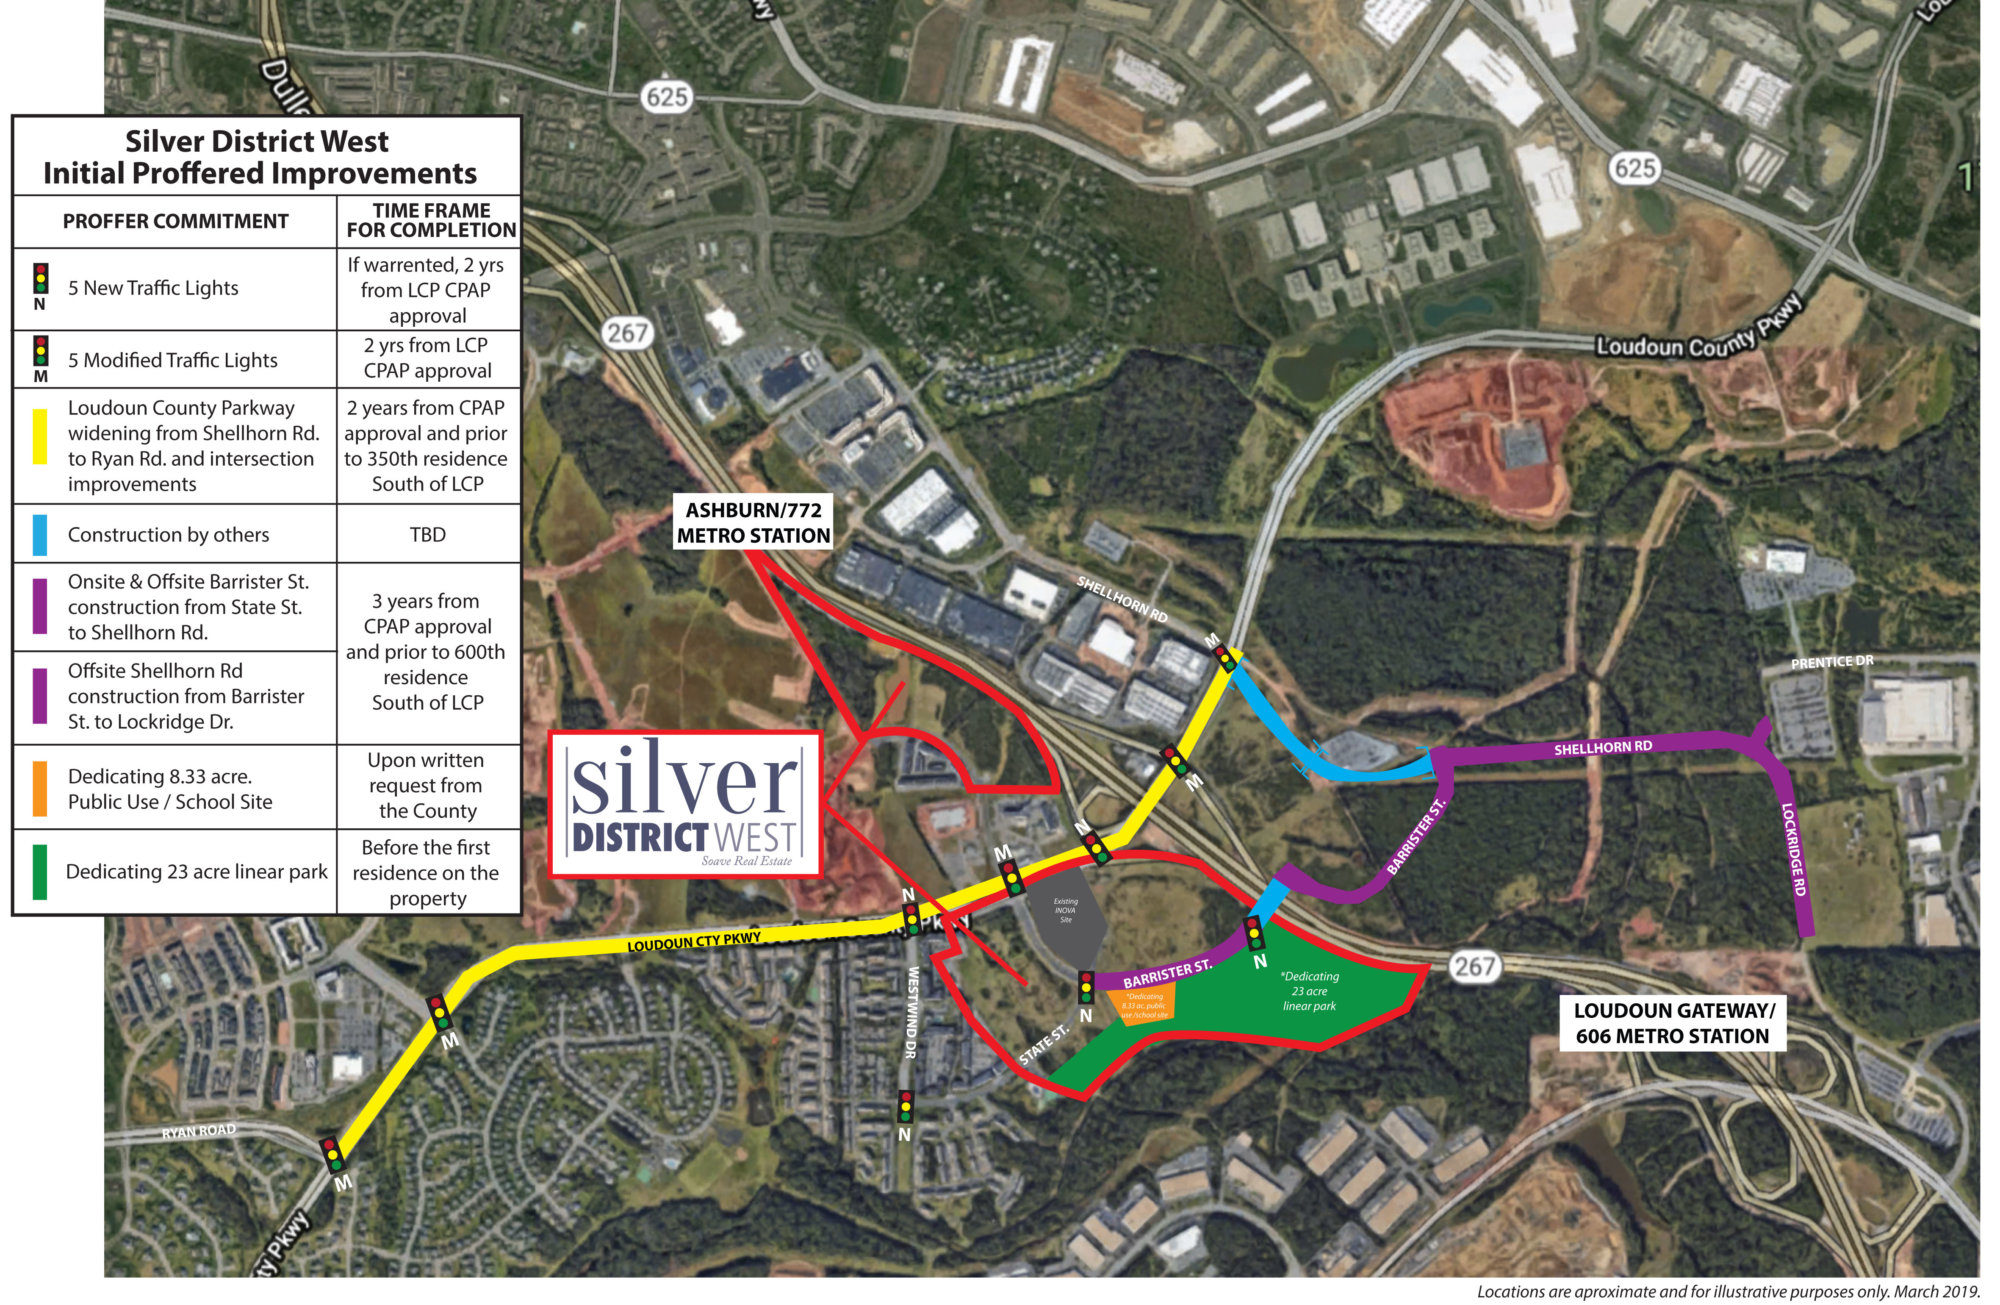 Loudoun Co. approves huge Silver Line mixed-use project | WTOP